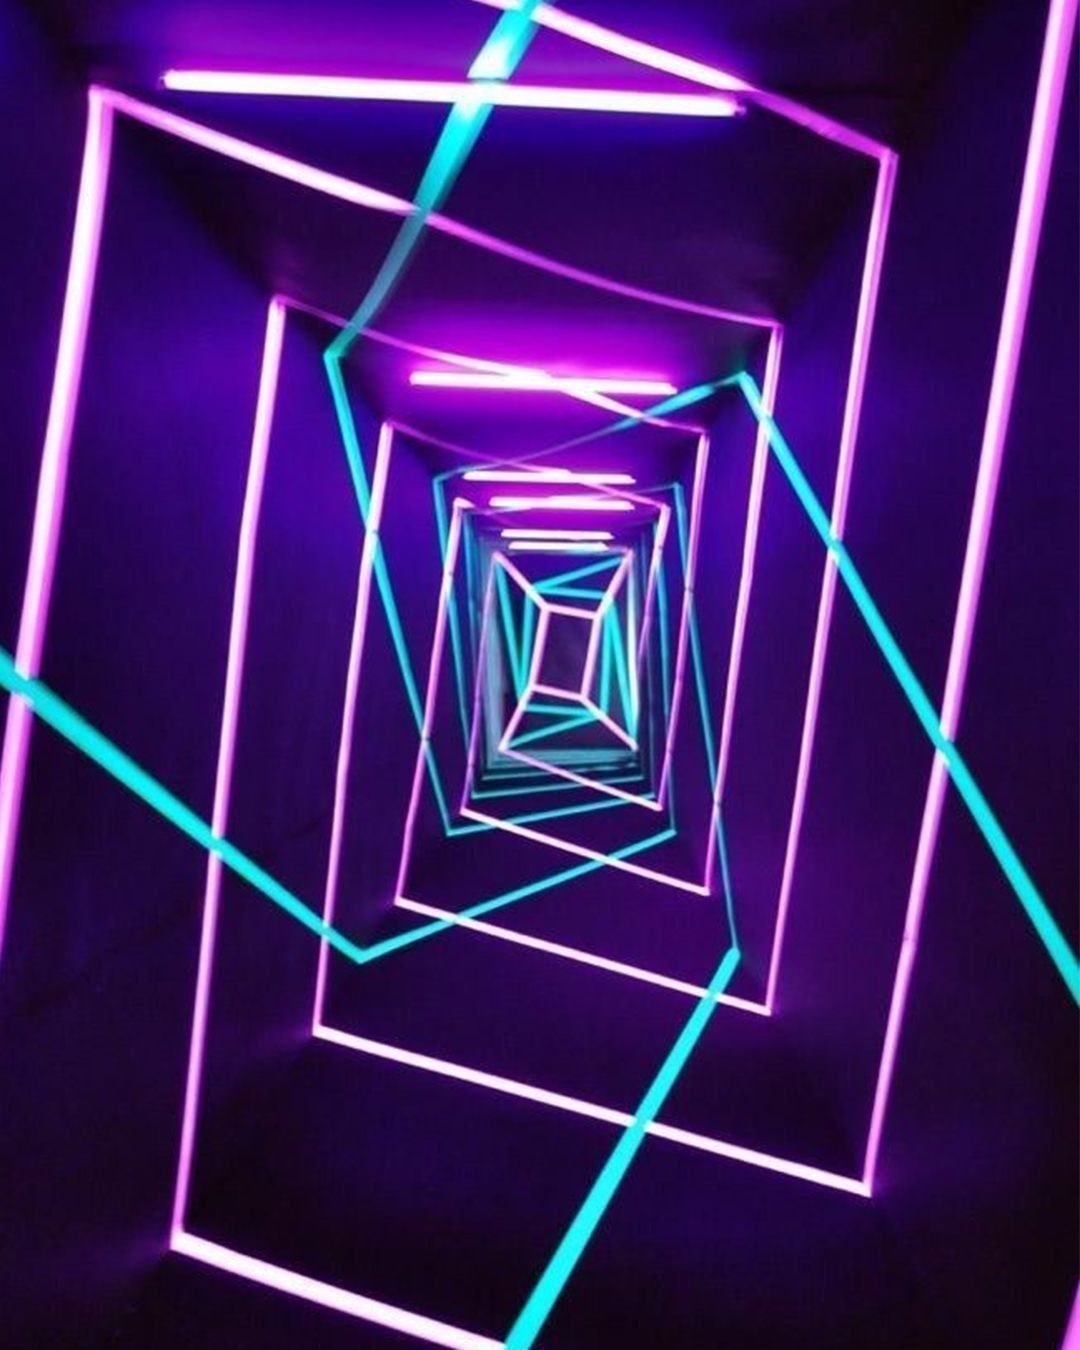 In the eyes and mind of a woman designer, a standard hallway morphs magically into a glowing corridor of vibrant neon.. Neon signs, Neon wallpaper, Neon lighting